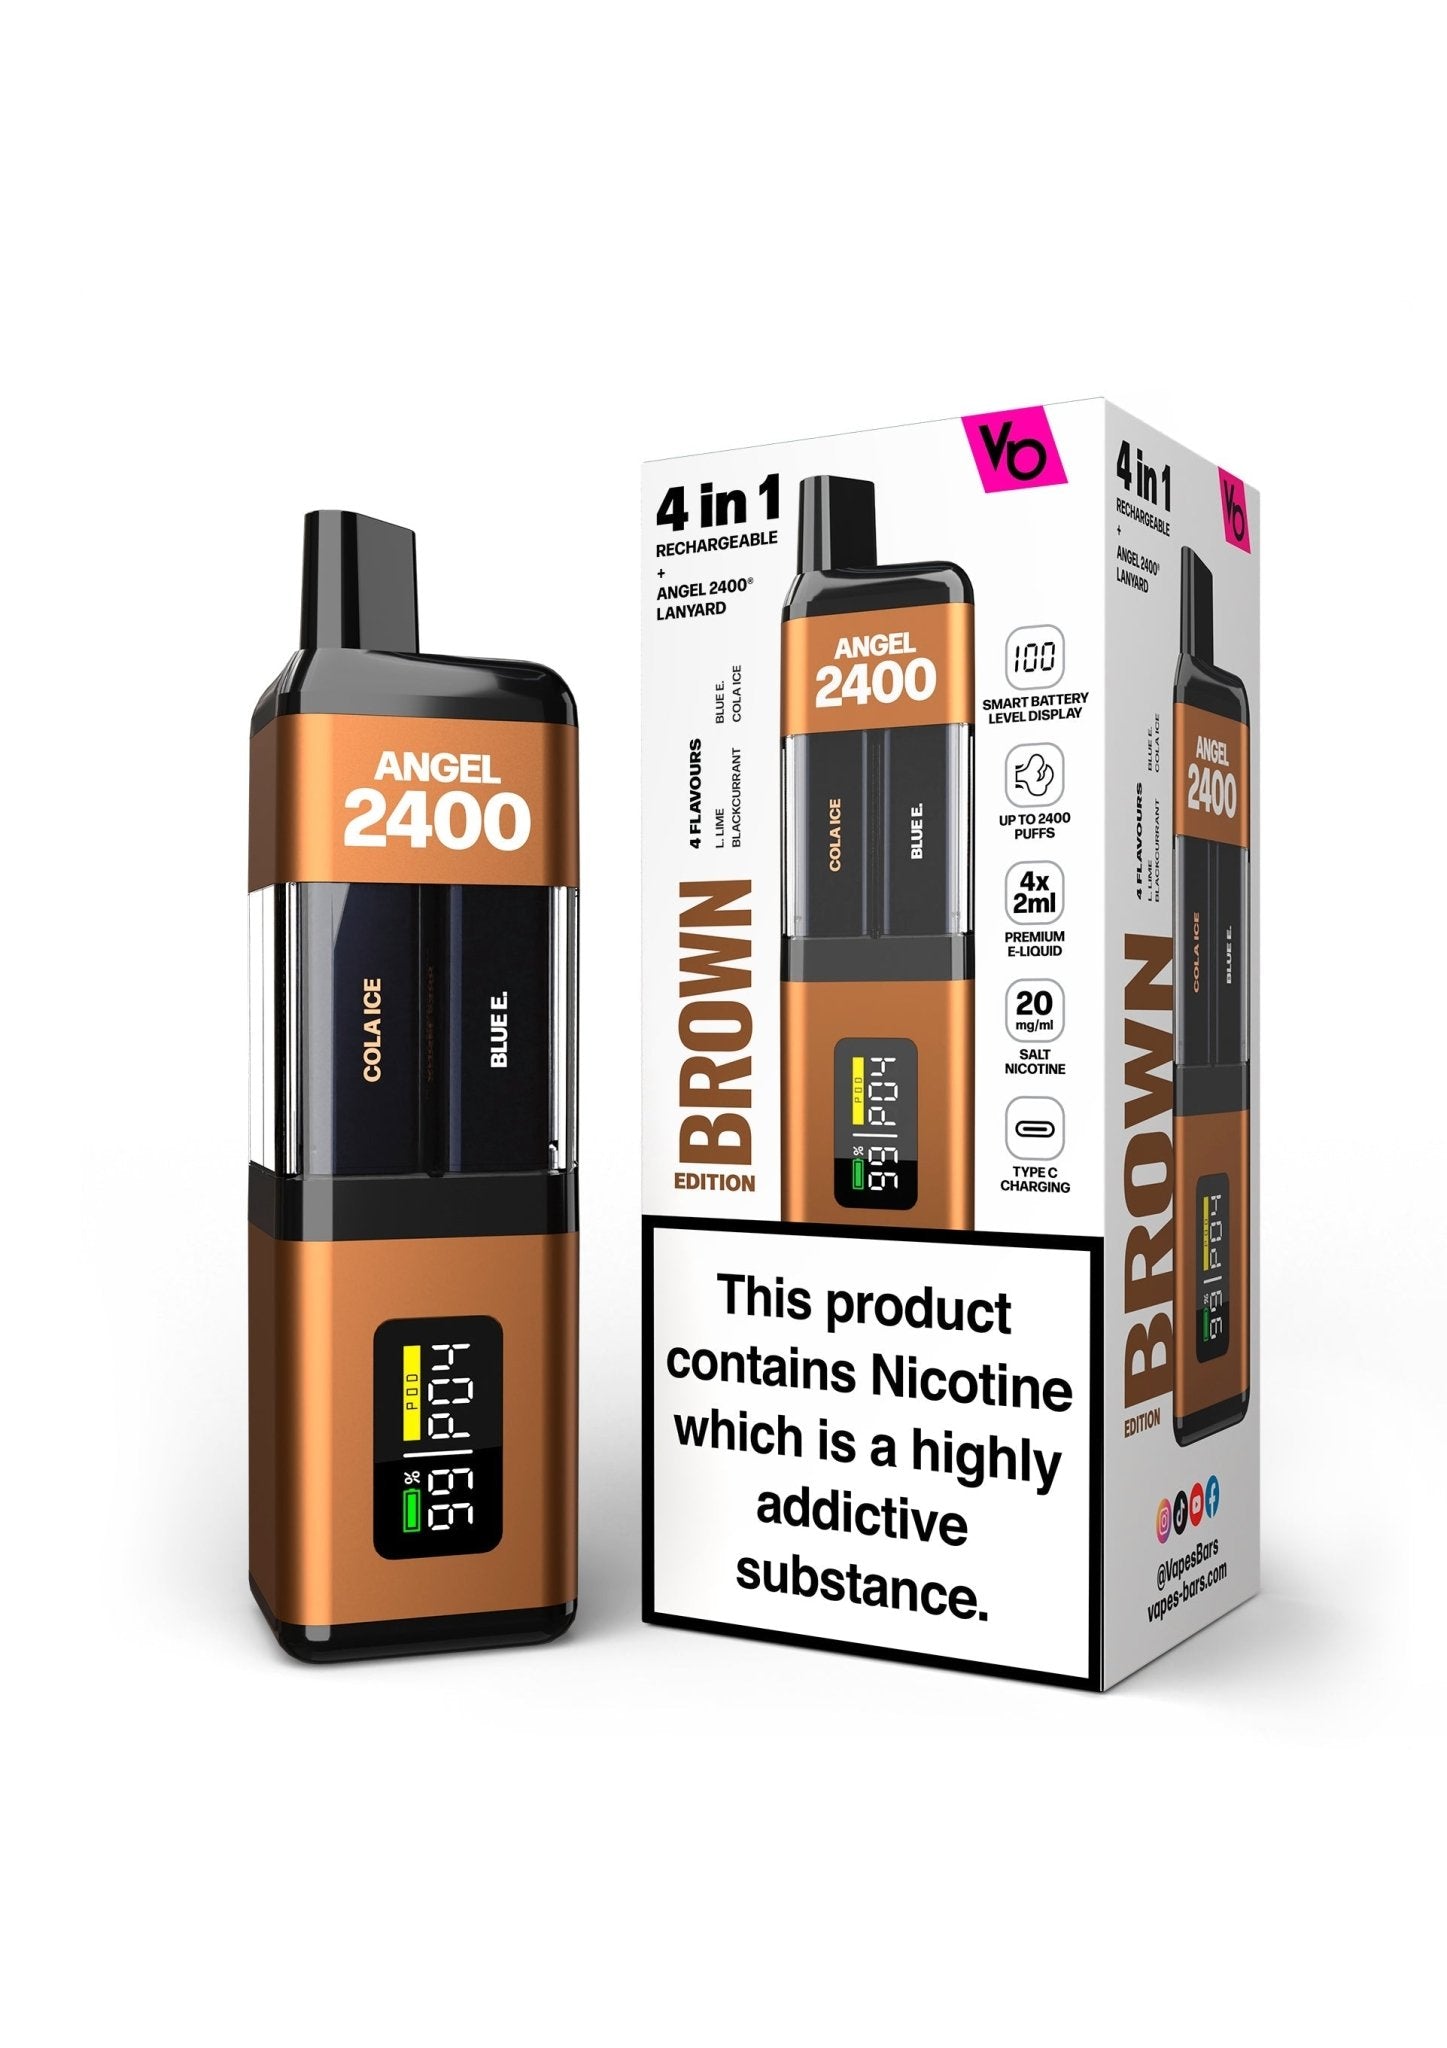 Angel 2400 Puffs Disposble Vape by Vapes Bars - Wolfvapes.co.uk-Brown Edition (Multi Flavour)